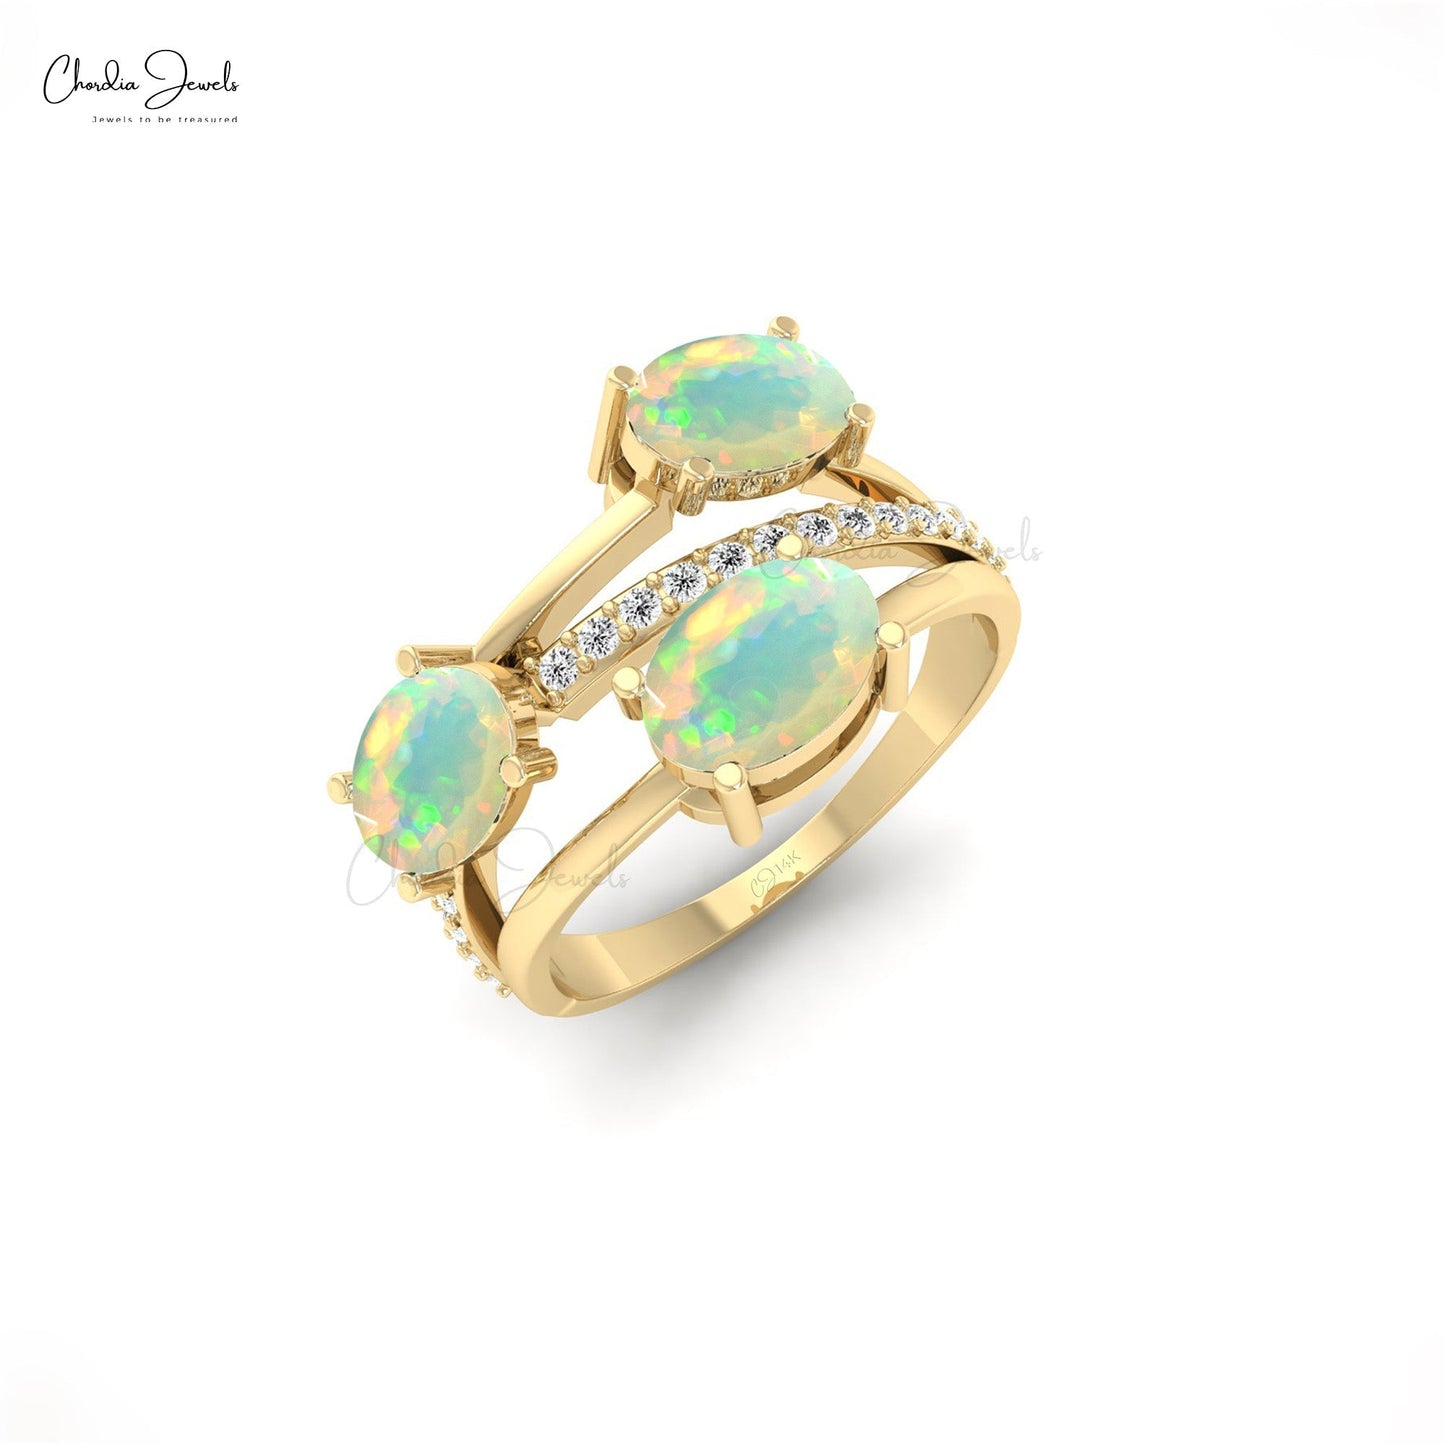 Oval-Cut Real Opal Stone Crossover Ring With Diamond Accent For Engagement